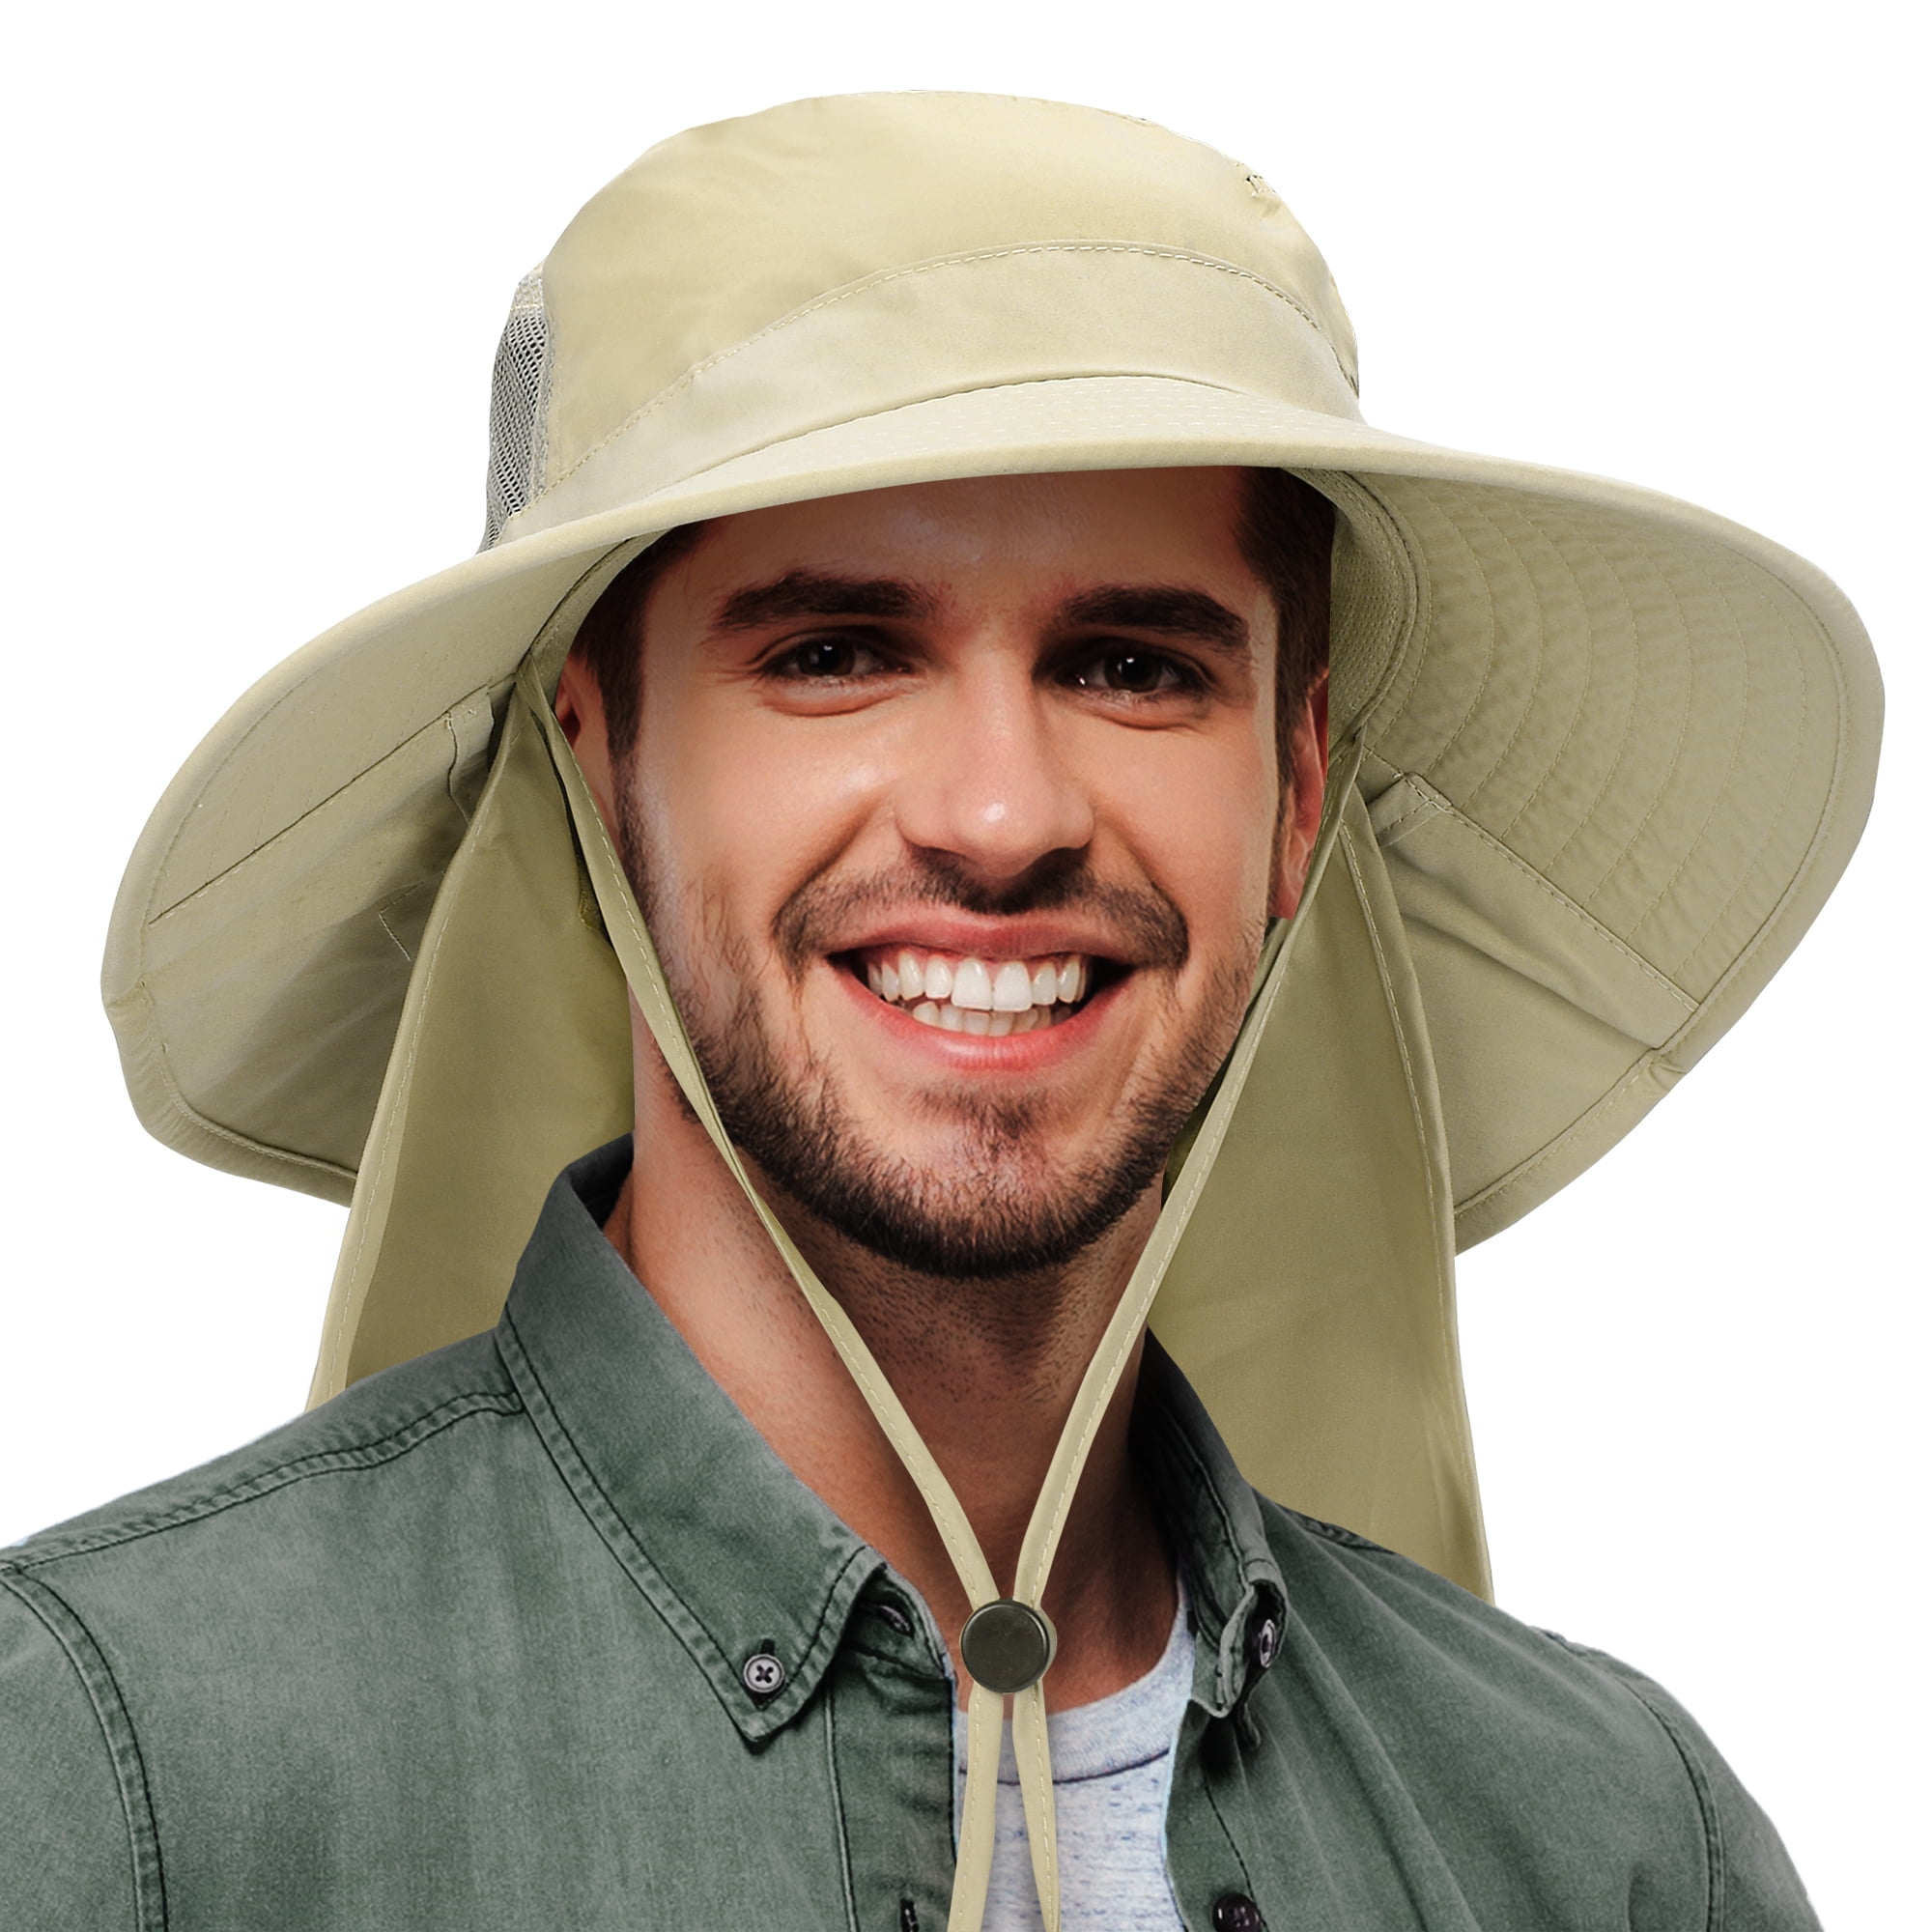 Wmcaps Outdoor Sun Hat for Men with 50+UPF Protection Safari Cap Wide Brim Fishing Hat with Neck Flap